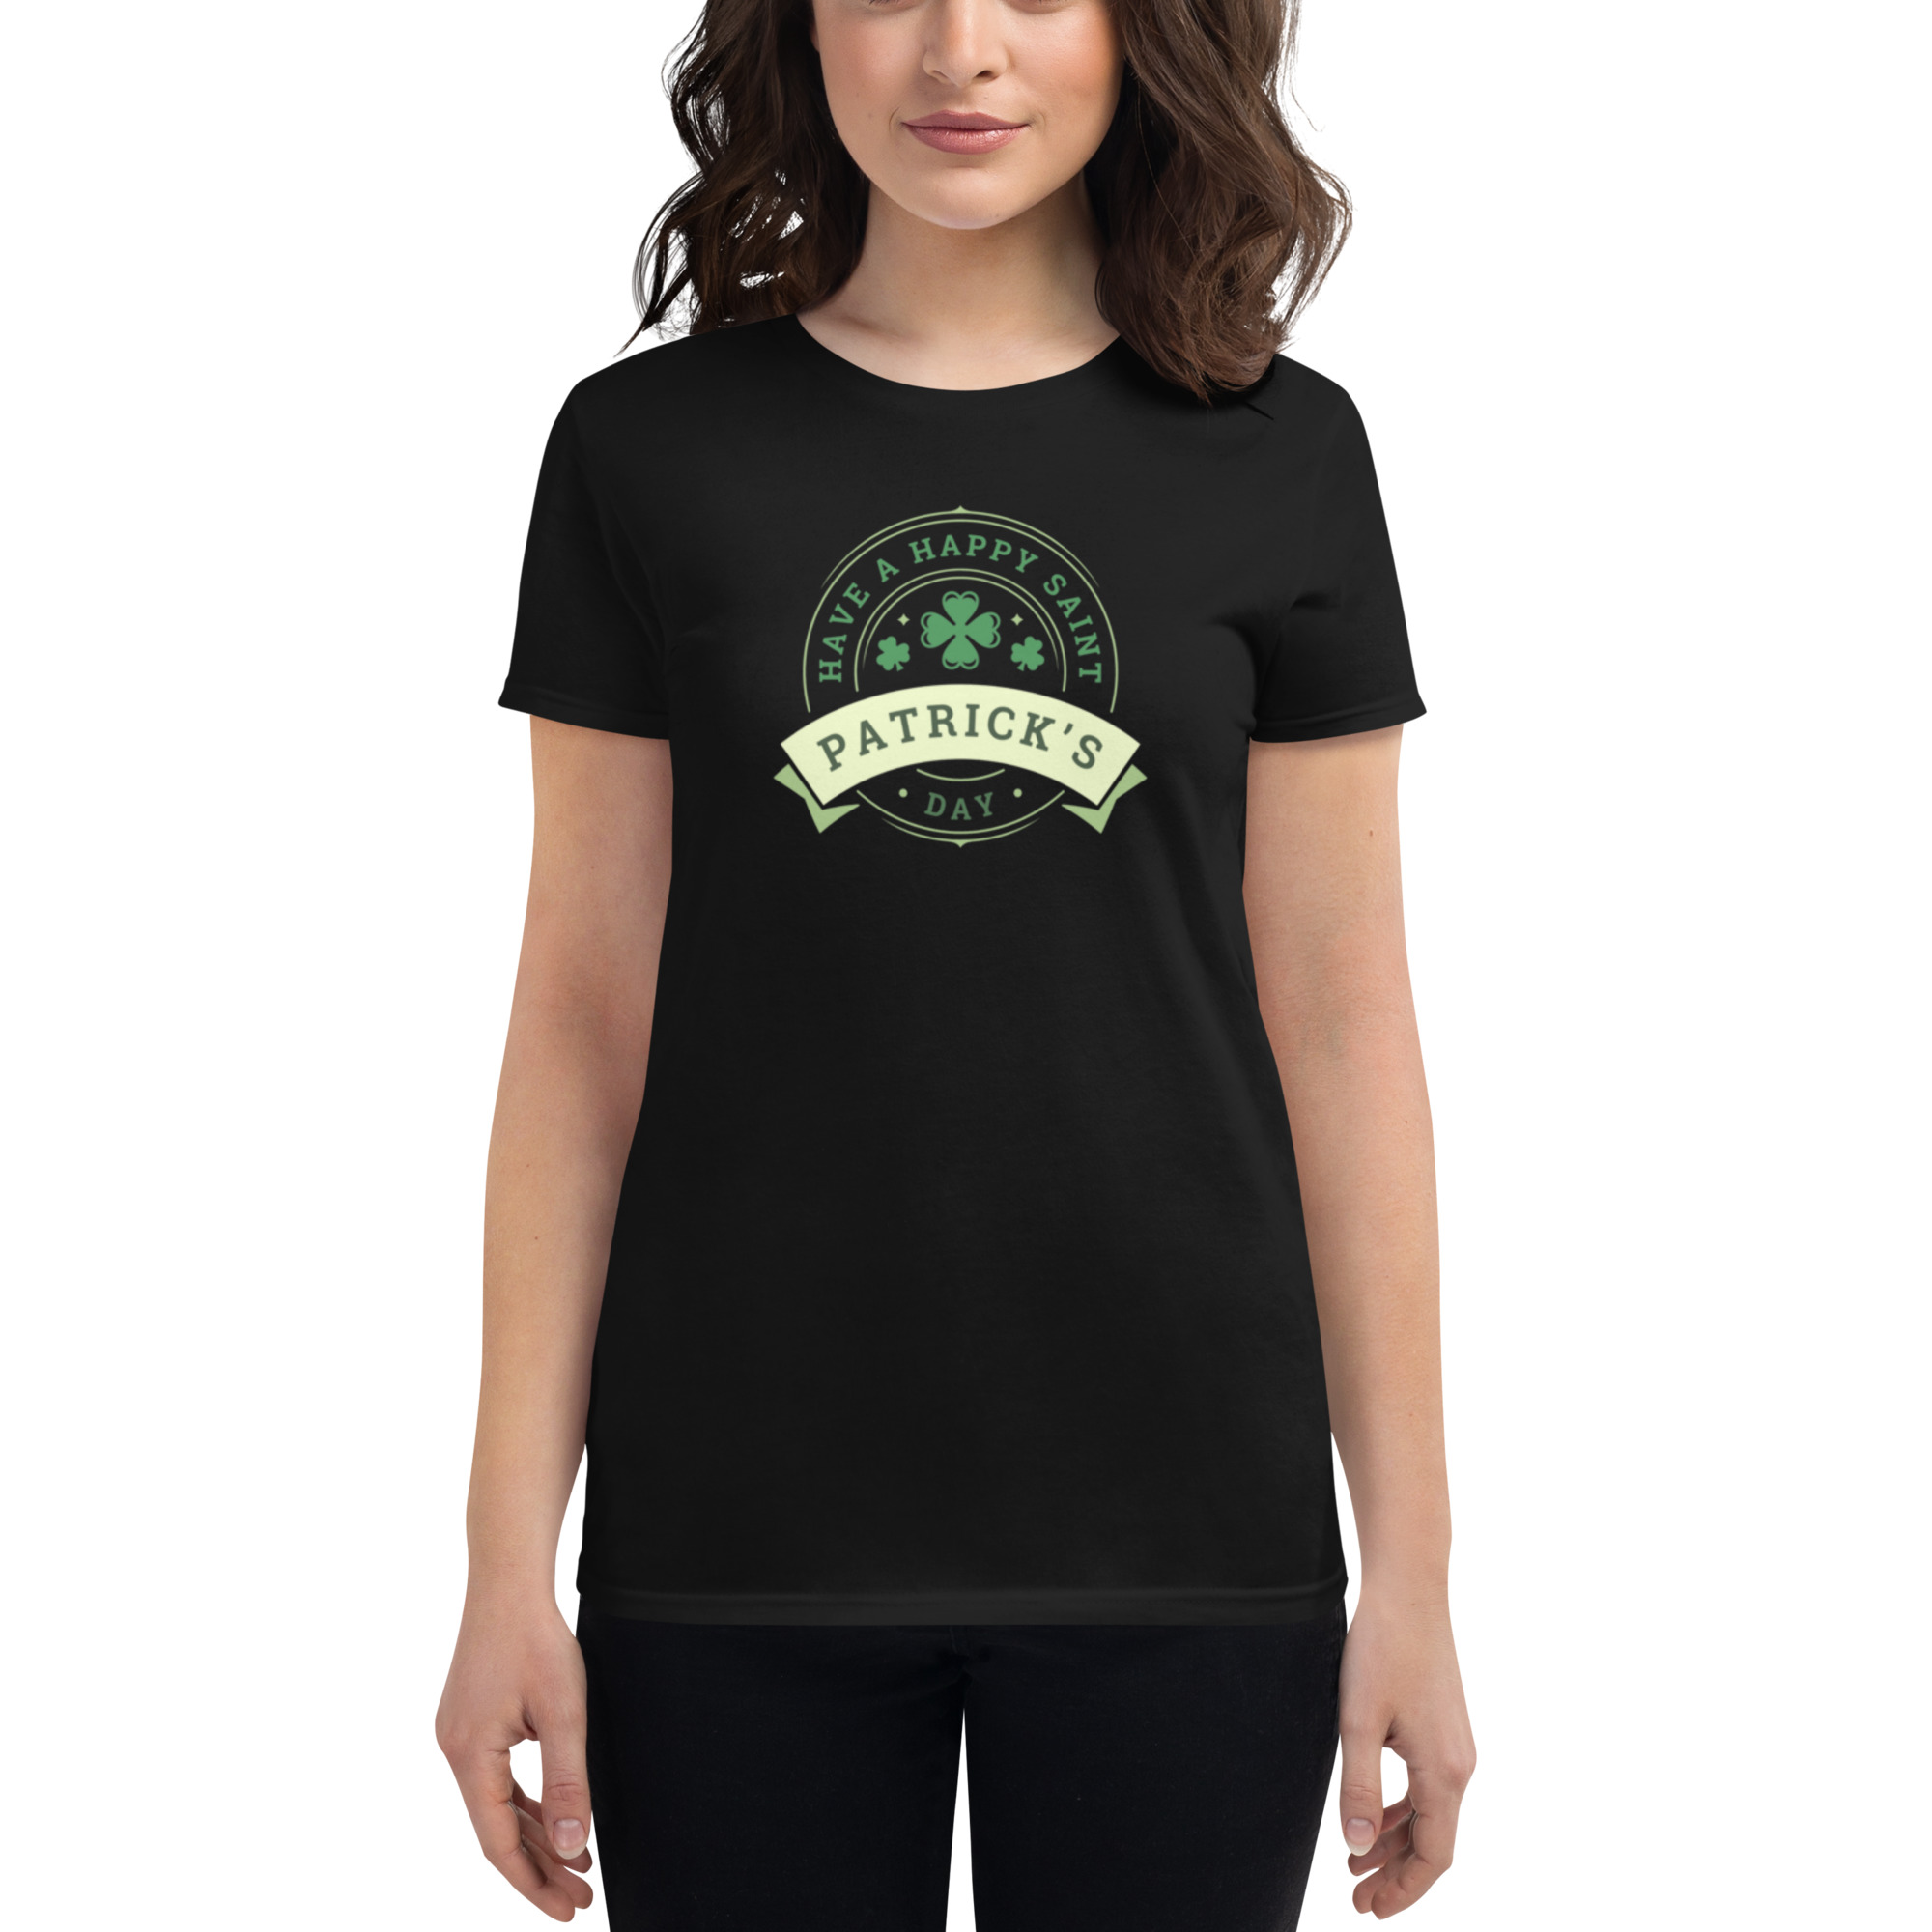 Women's St. Patriick's Day Short Sleeve T-Shirt - Have a Happy One